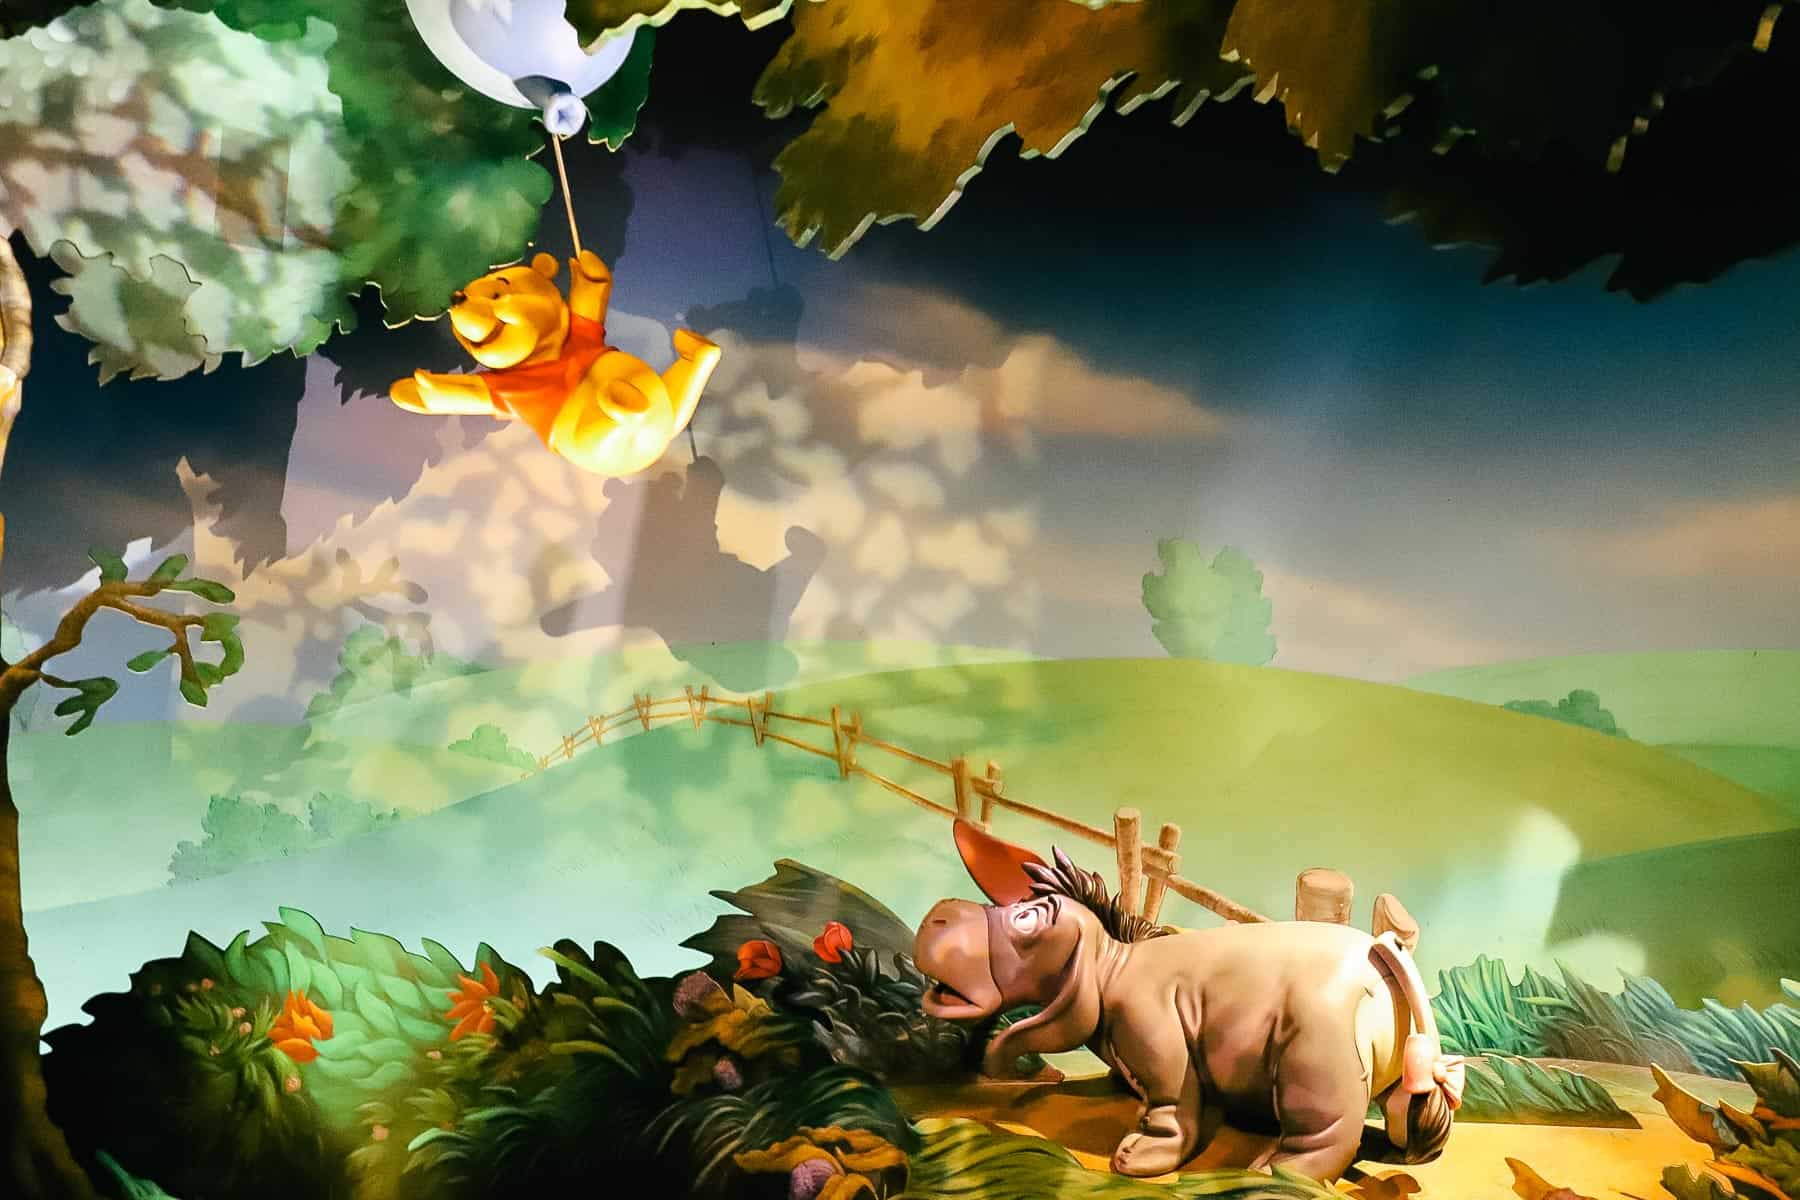 Winnie the Pooh floats to the top of the trees with a balloon while Eeyore looks on from below. 